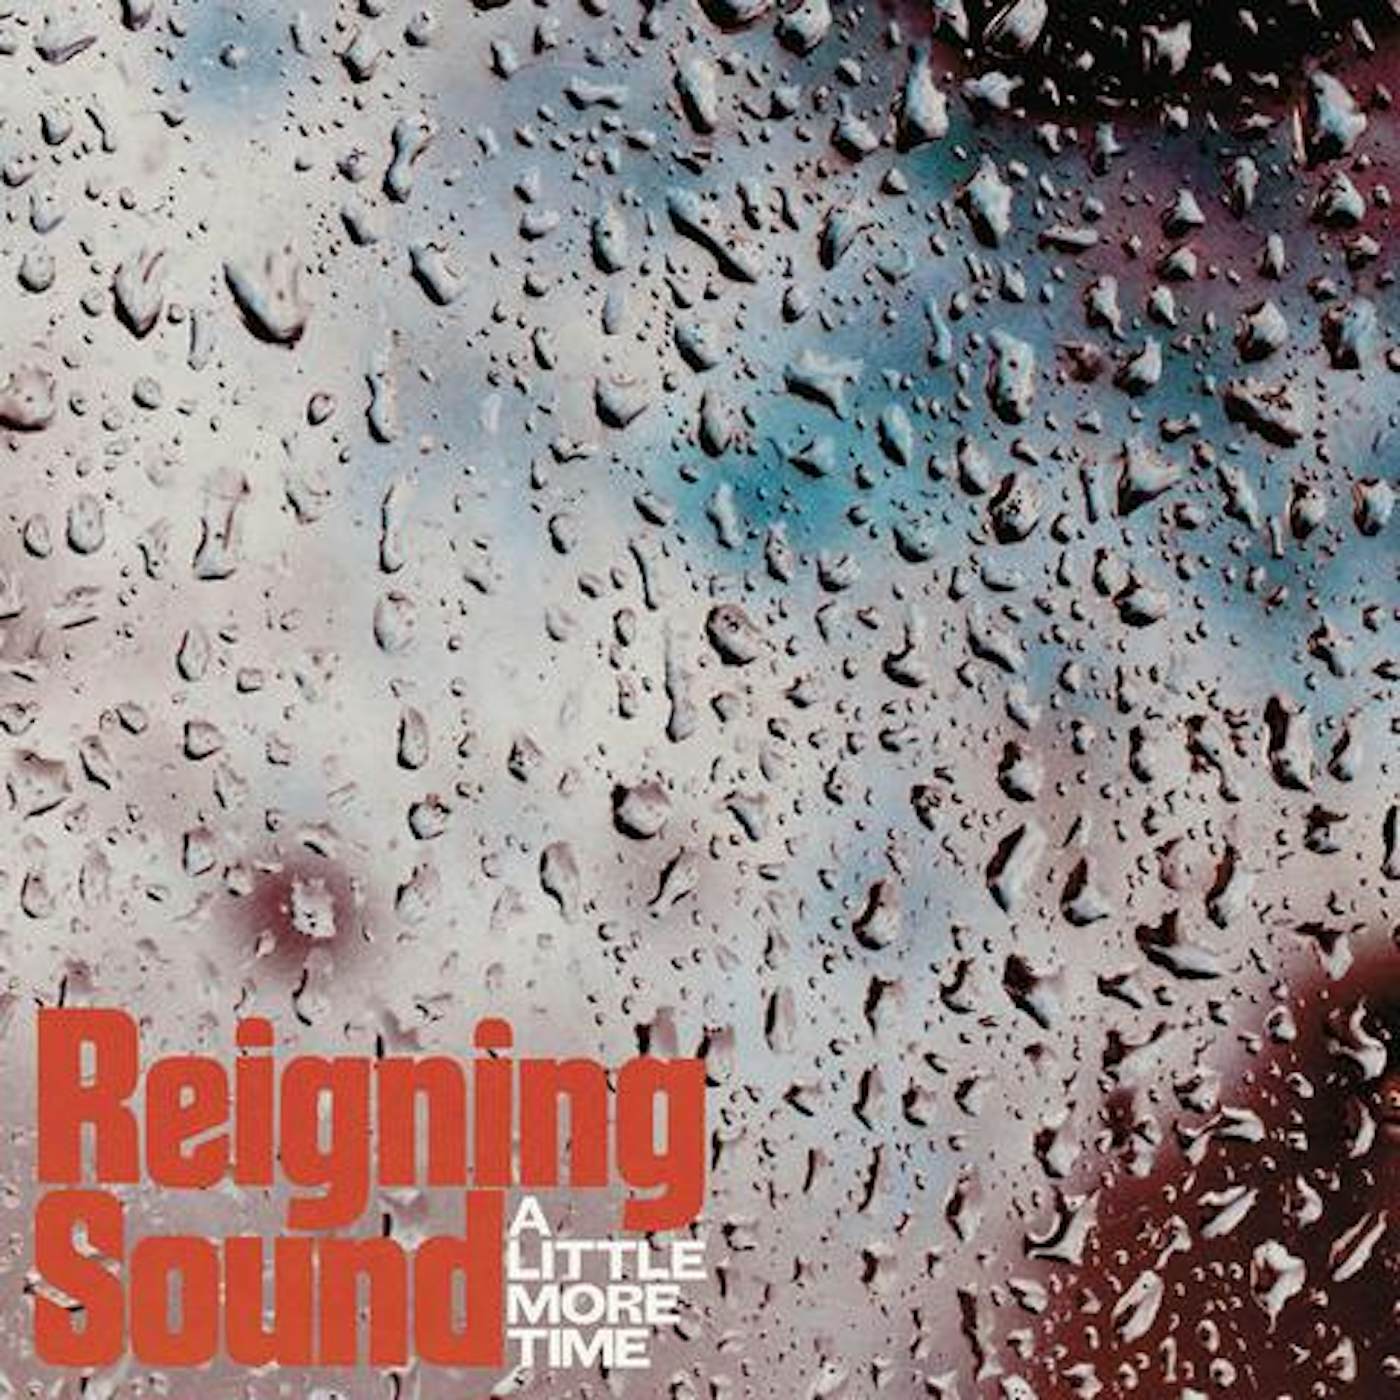 Reigning Sound A LITTLE MORE TIME / LONELY GHOST Vinyl Record